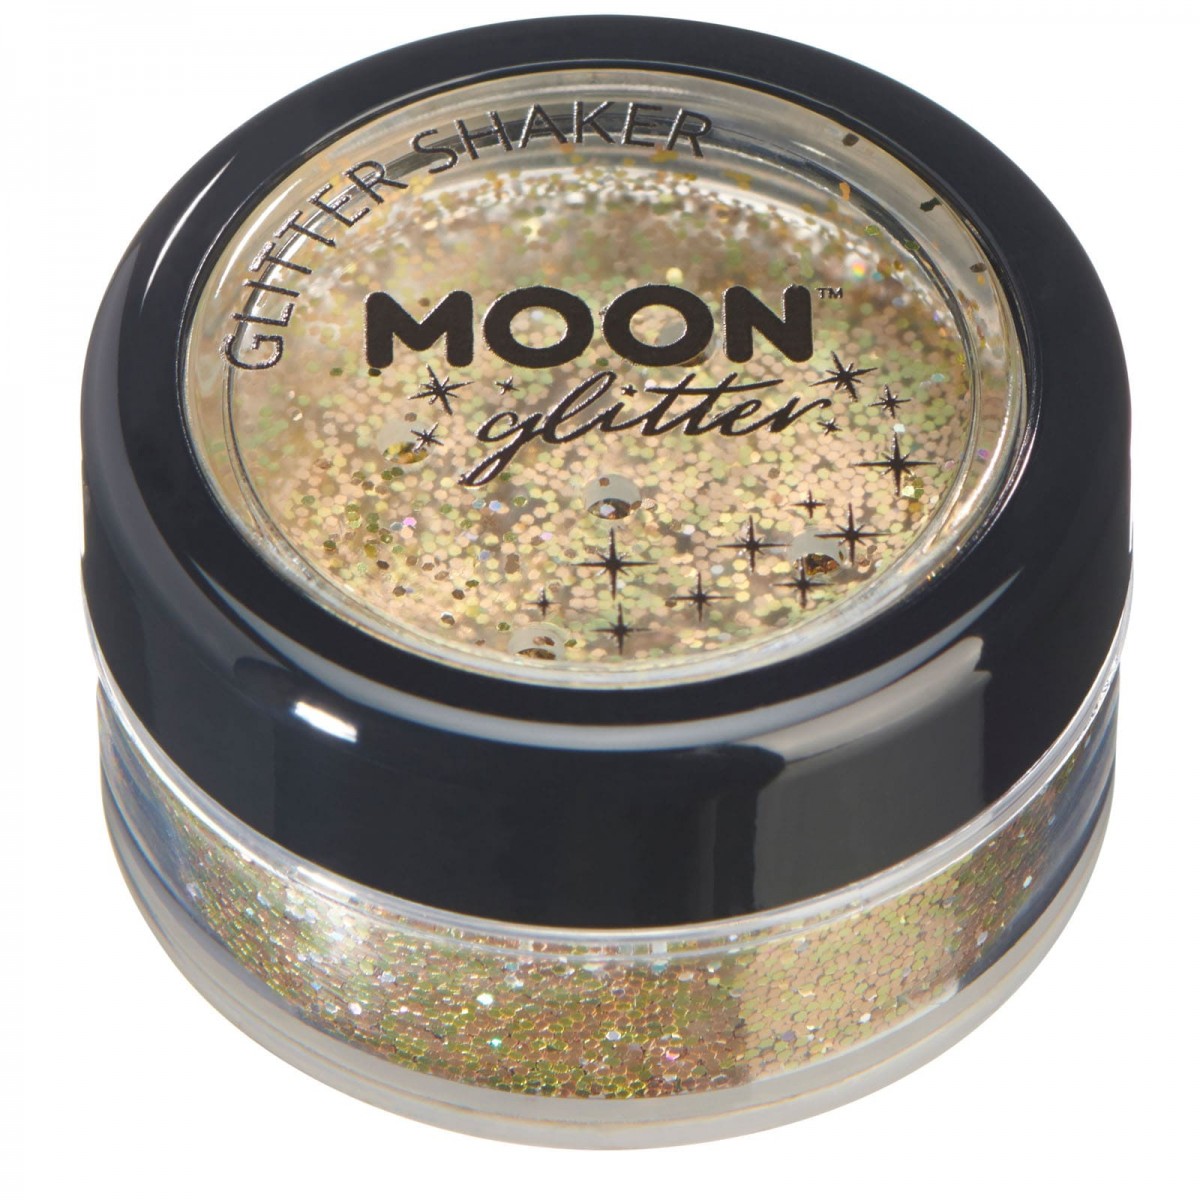 MOON CREATIONS G16 HOLOGRAPHIC GLITTER SHAKER GOLD 5g